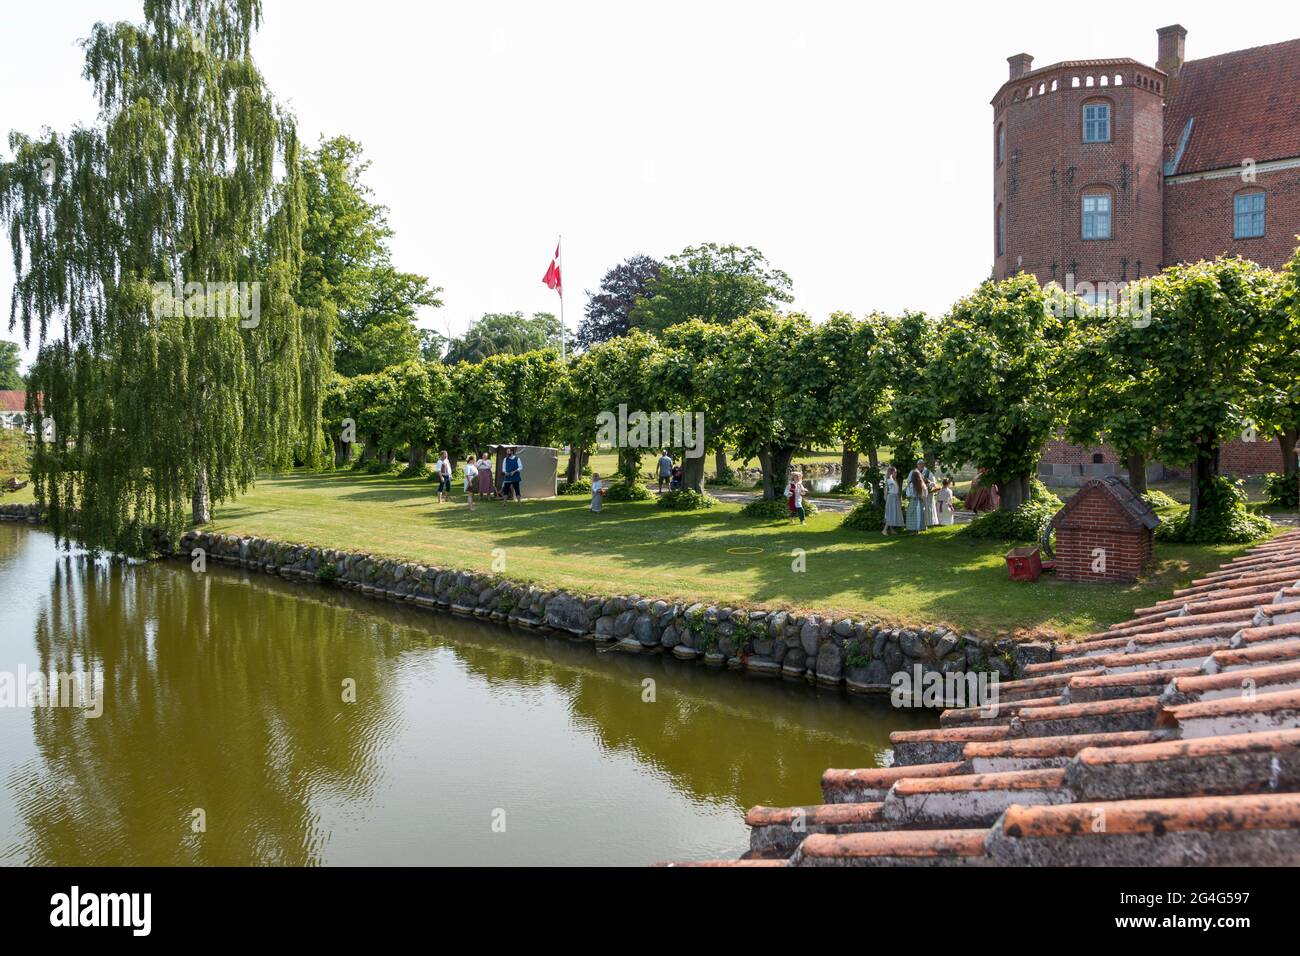 Auning, Denmark - 19 June 2021: Gammel Estrup Castle from the 14th century, The castle is surrounded by beautiful nature, trees and lakes and moat Stock Photo